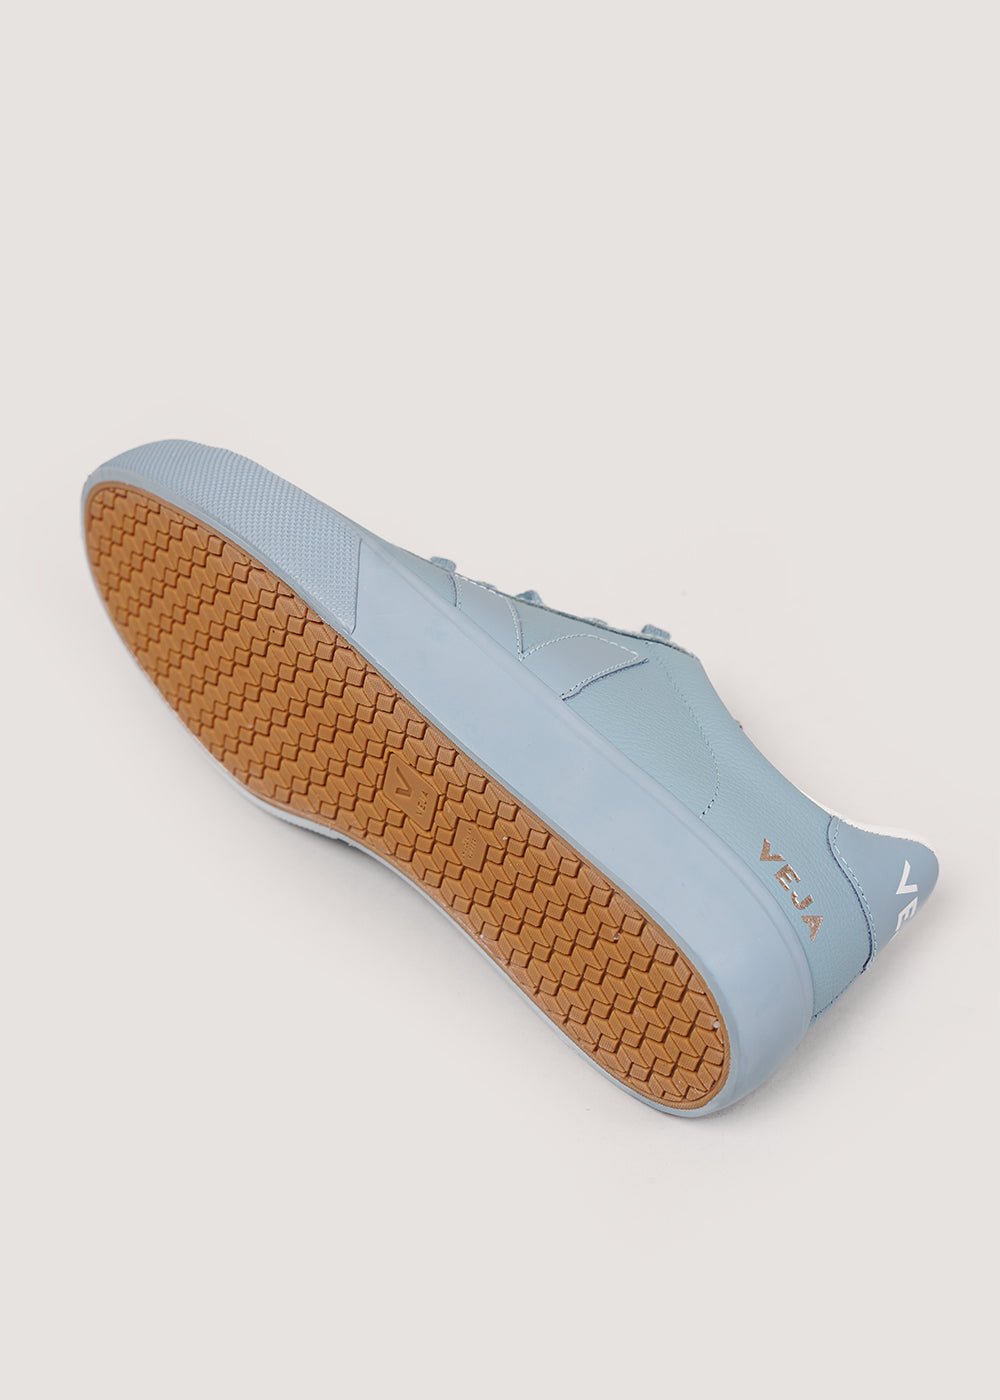 Veja Full Steel Campo Sneakers - New Classics Studios Sustainable Ethical Fashion Canada